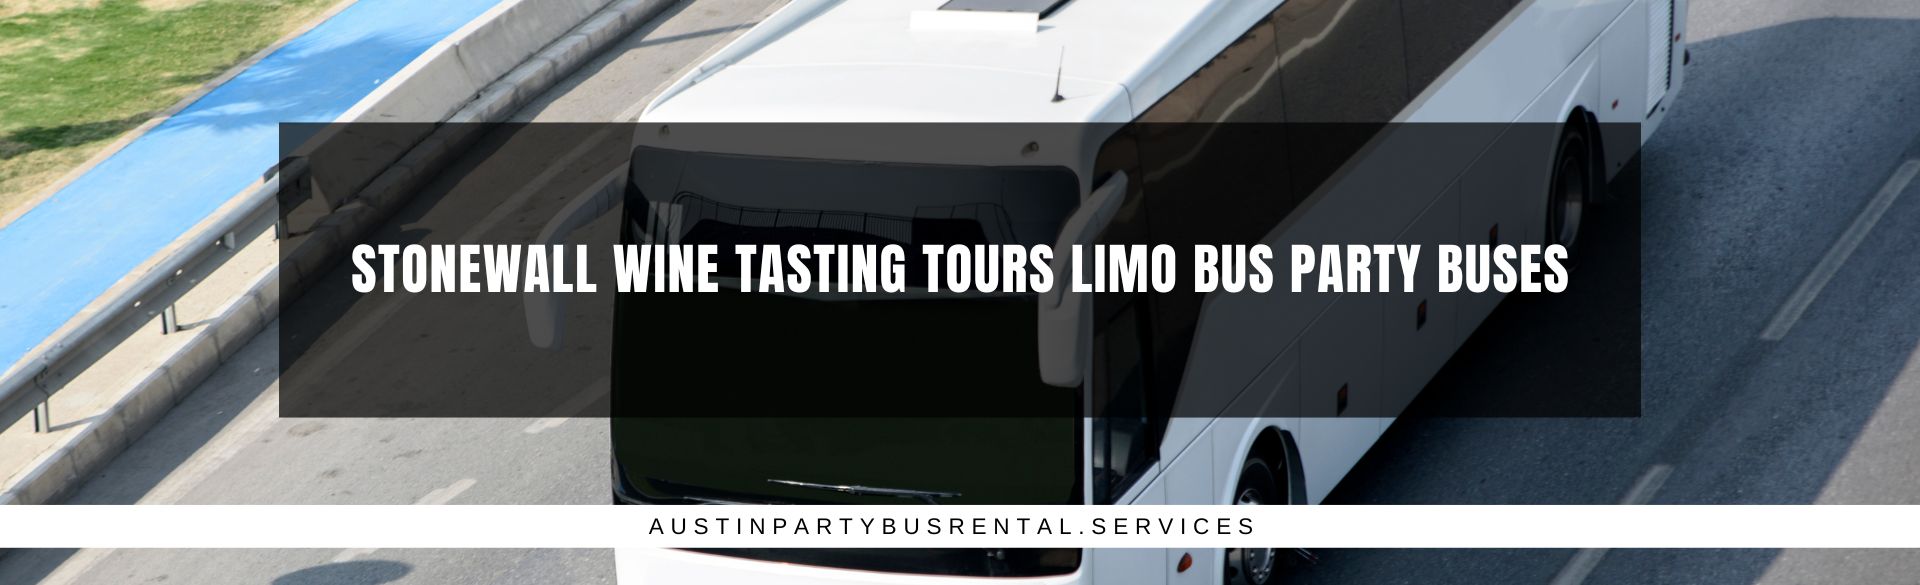 Stonewall Wine Tasting Tours Limo Bus Party Buses